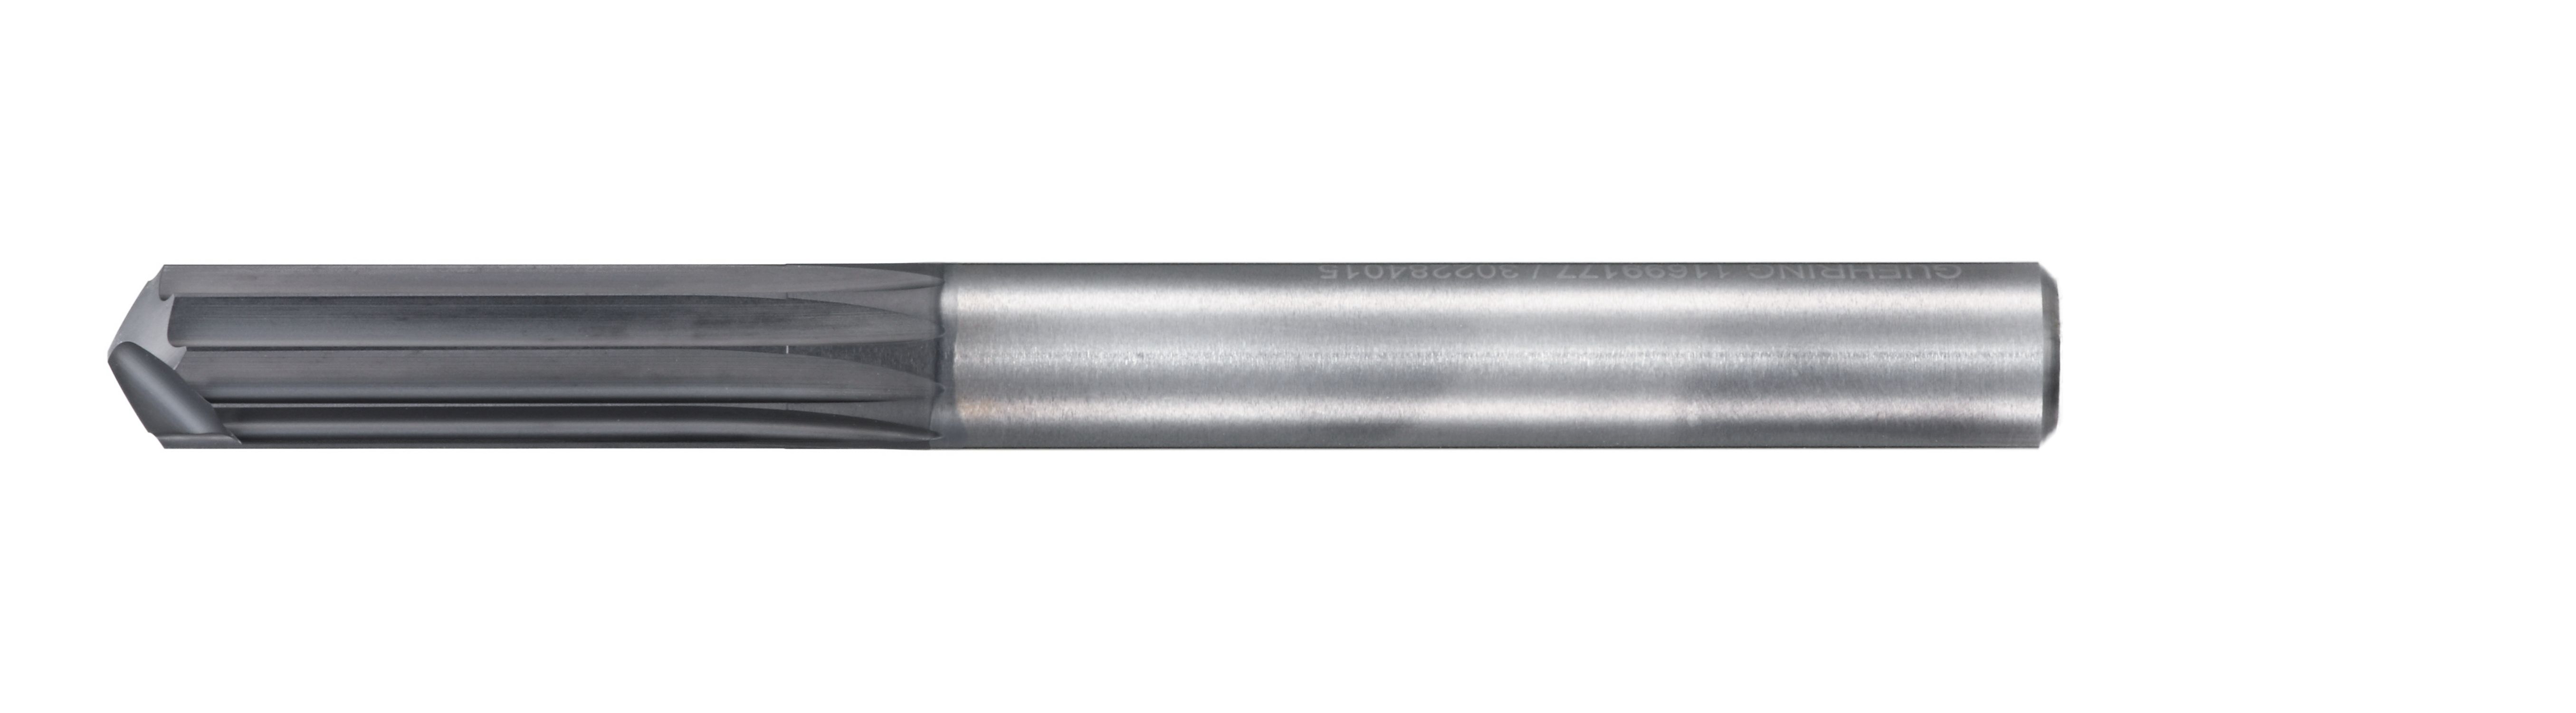 Grooving/Shouldering Multi-Flute End Mill for CFRP with Drill Point CR100 6720 6720-006.000